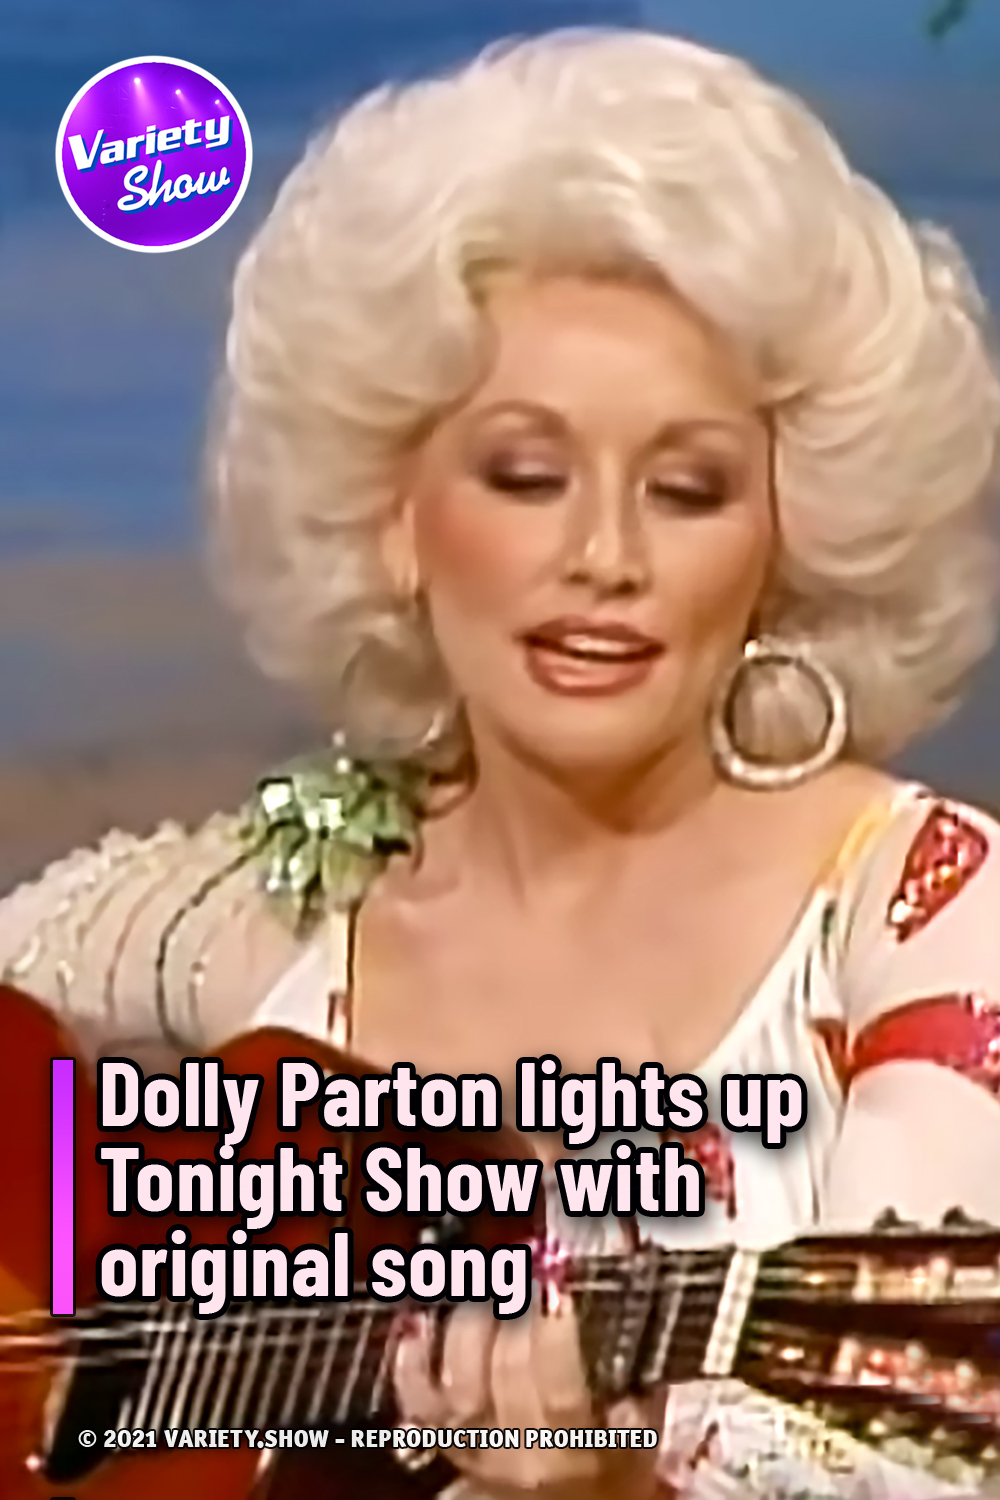 Dolly Parton lights up Tonight Show with original song